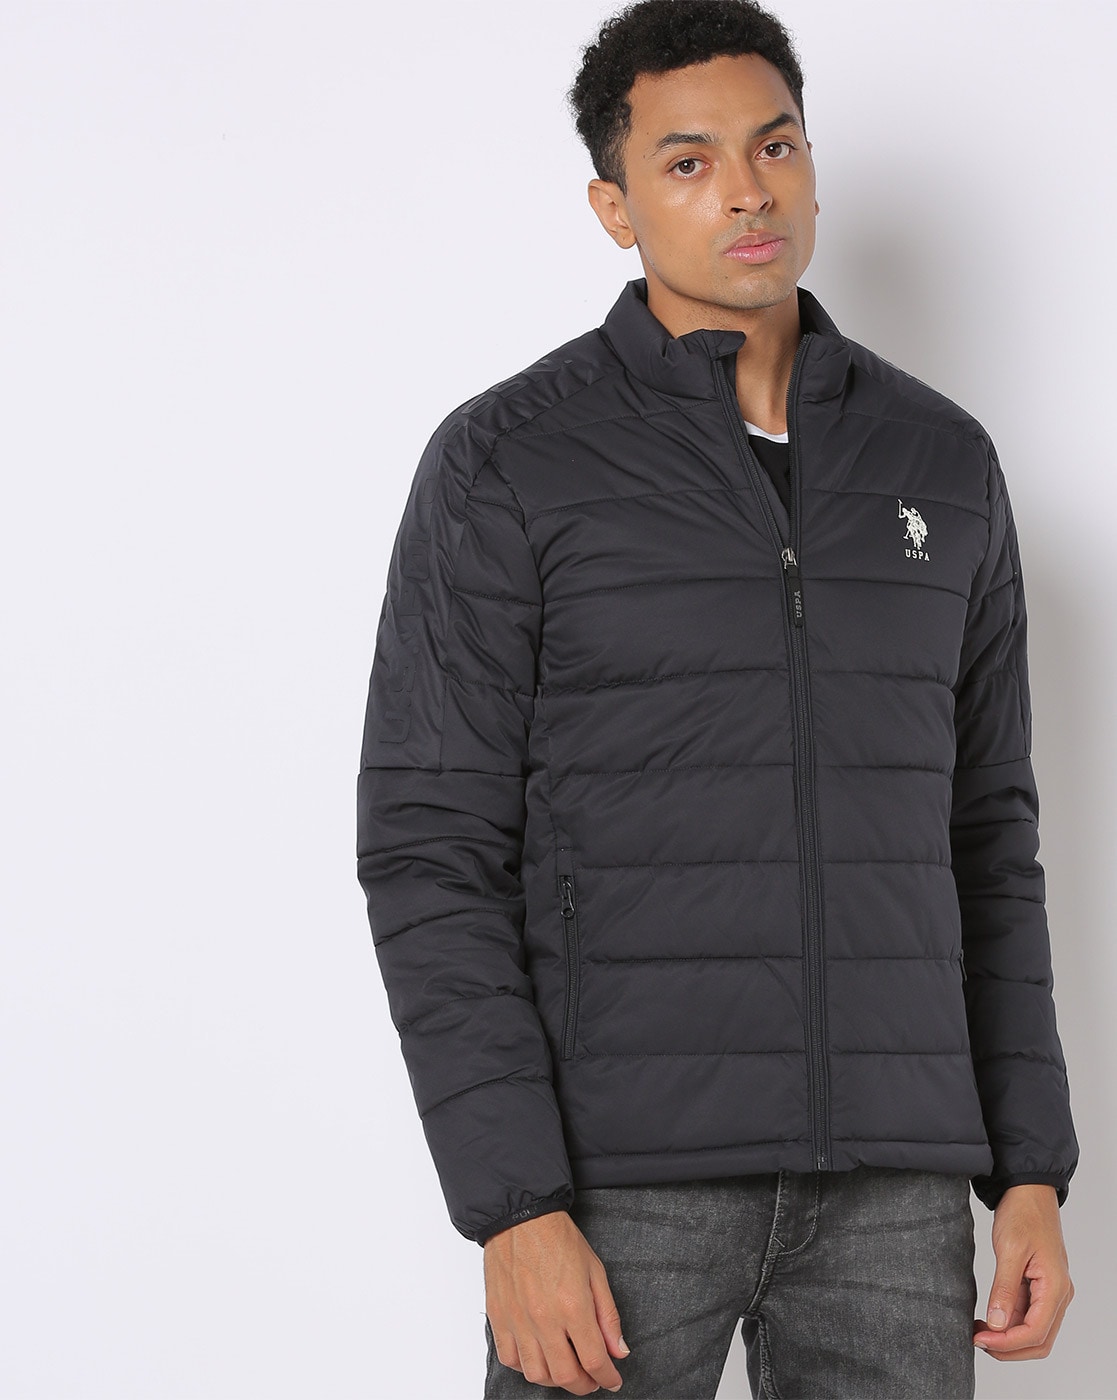 U.S. POLO ASSN. Full Sleeve Printed Men Jacket - Buy U.S. POLO ASSN. Full  Sleeve Printed Men Jacket Online at Best Prices in India | Flipkart.com